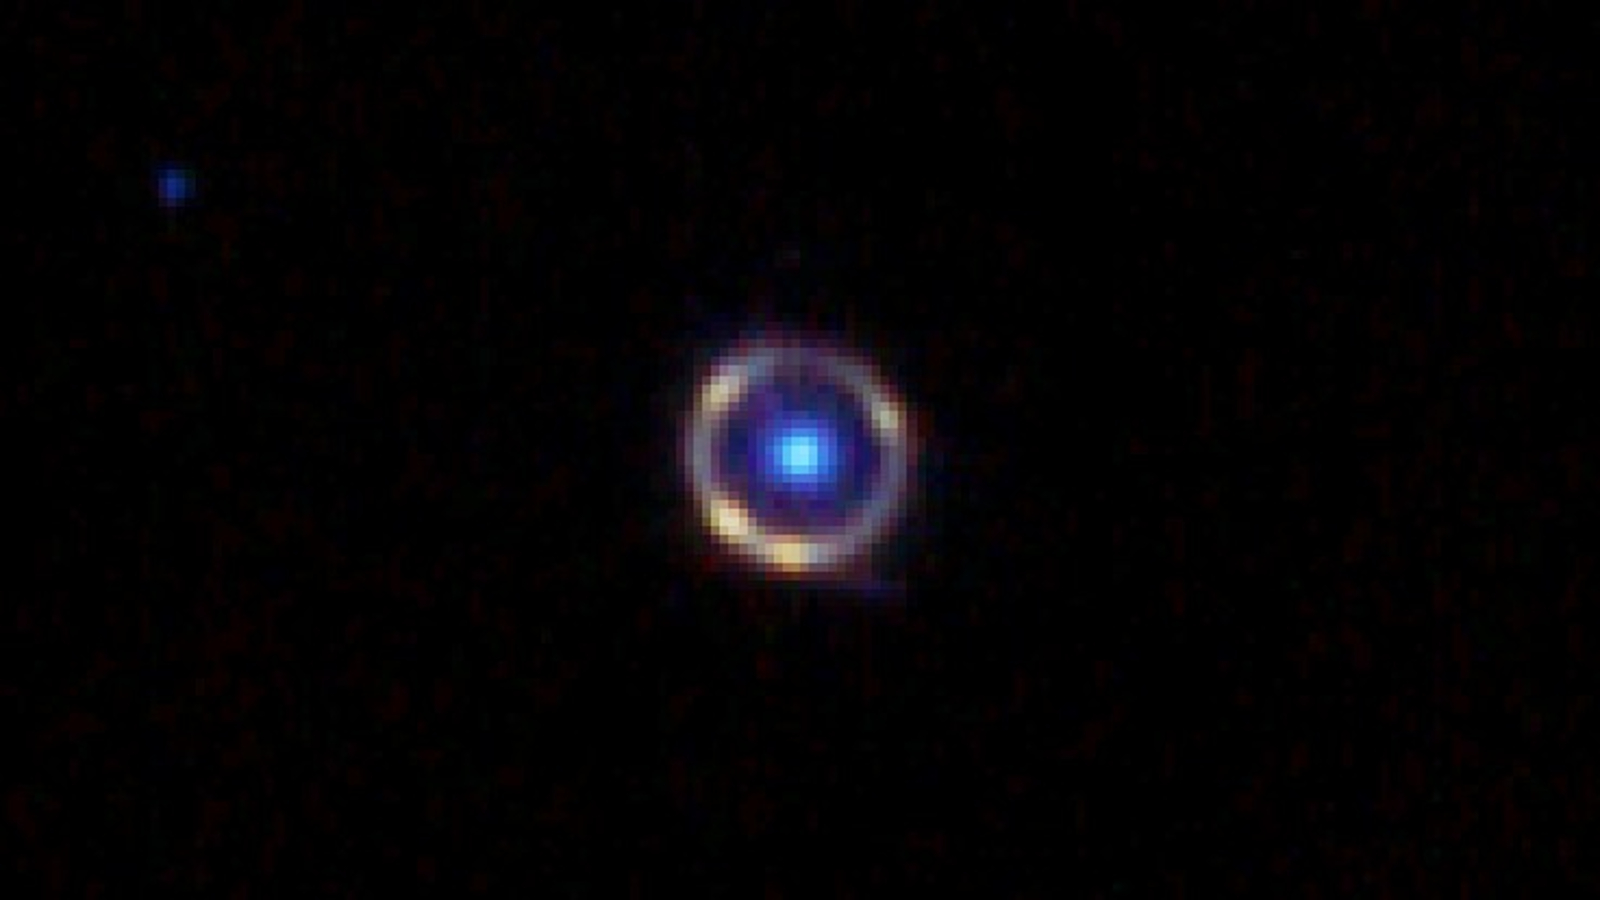 A close up of the JO418 Einstein ring.